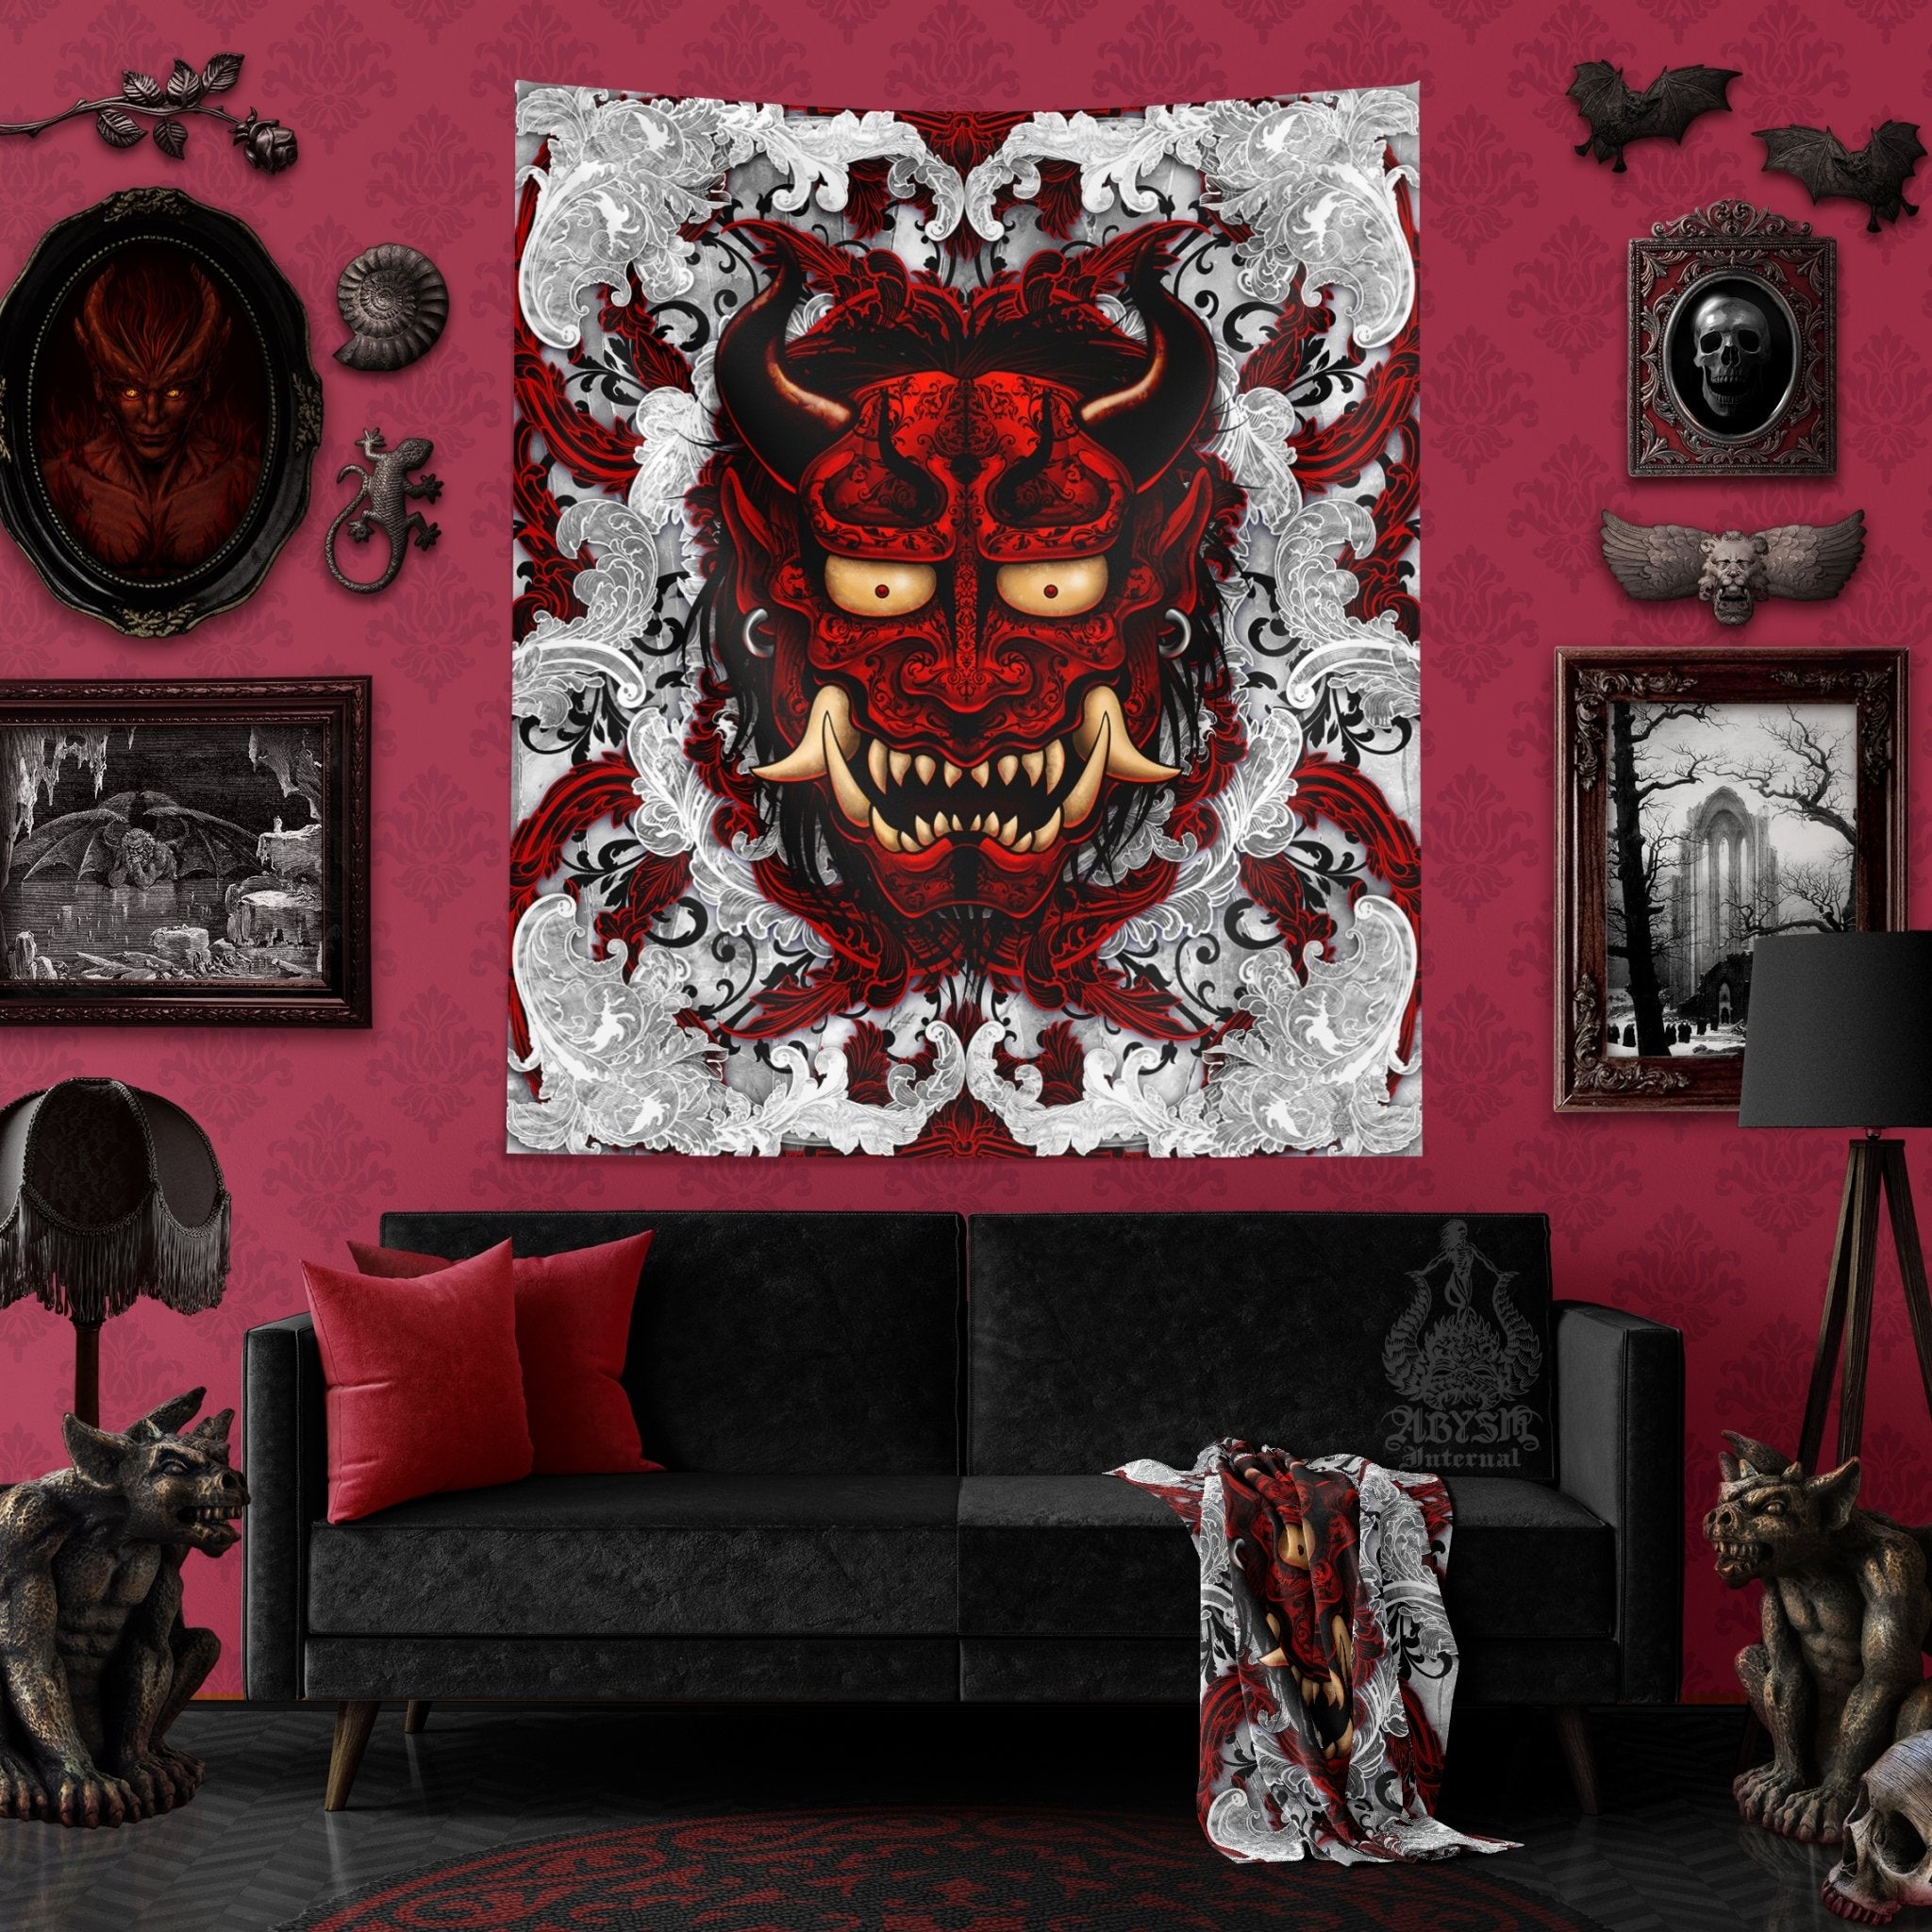 Oni Tapestry, Gothic Wall Hanging, Gamer Home Decor, Art Print, Japanese Demon - Bloody - Abysm Internal